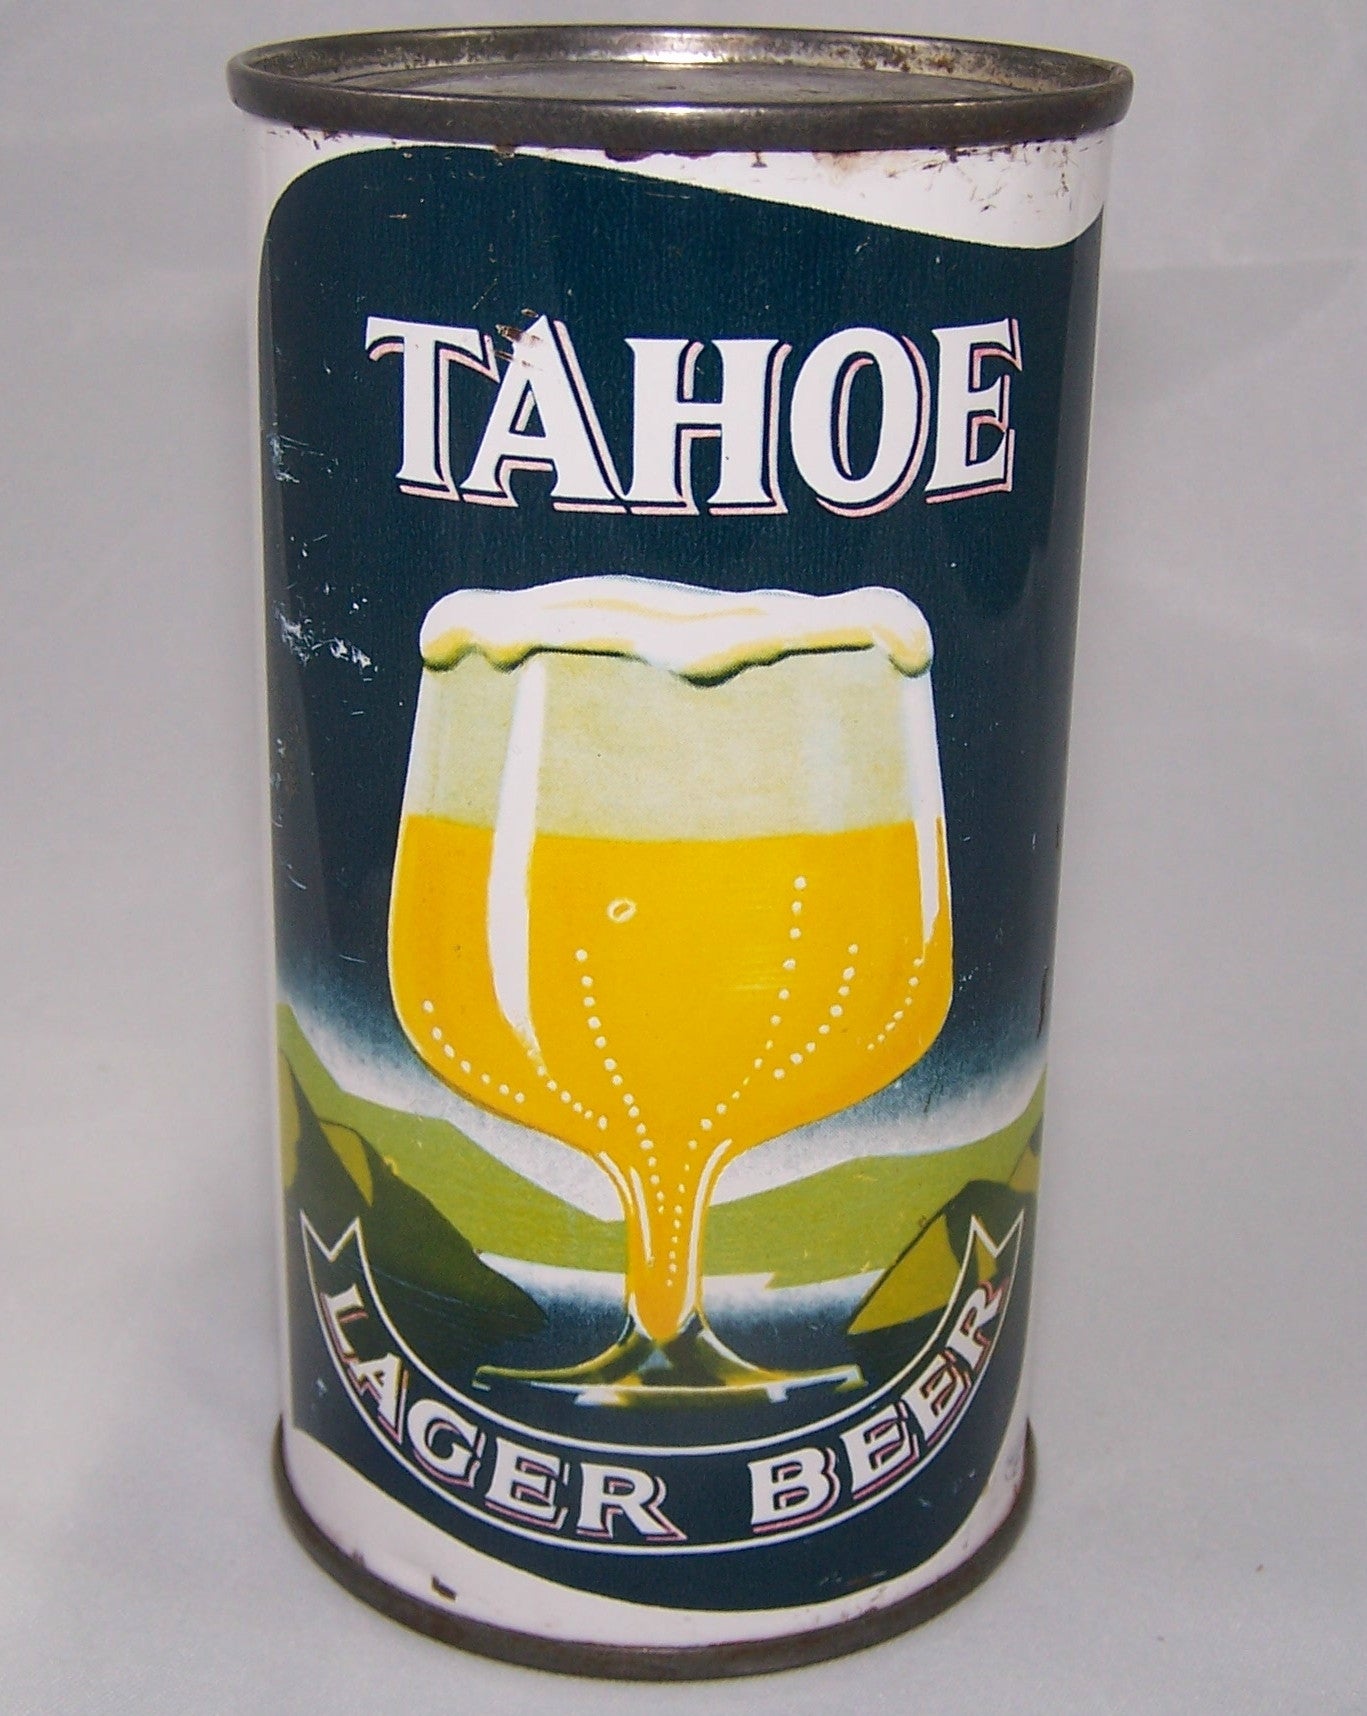 Tahoe Lager Beer, USBC 138-8, Grade 1- Sold on 05/15/16